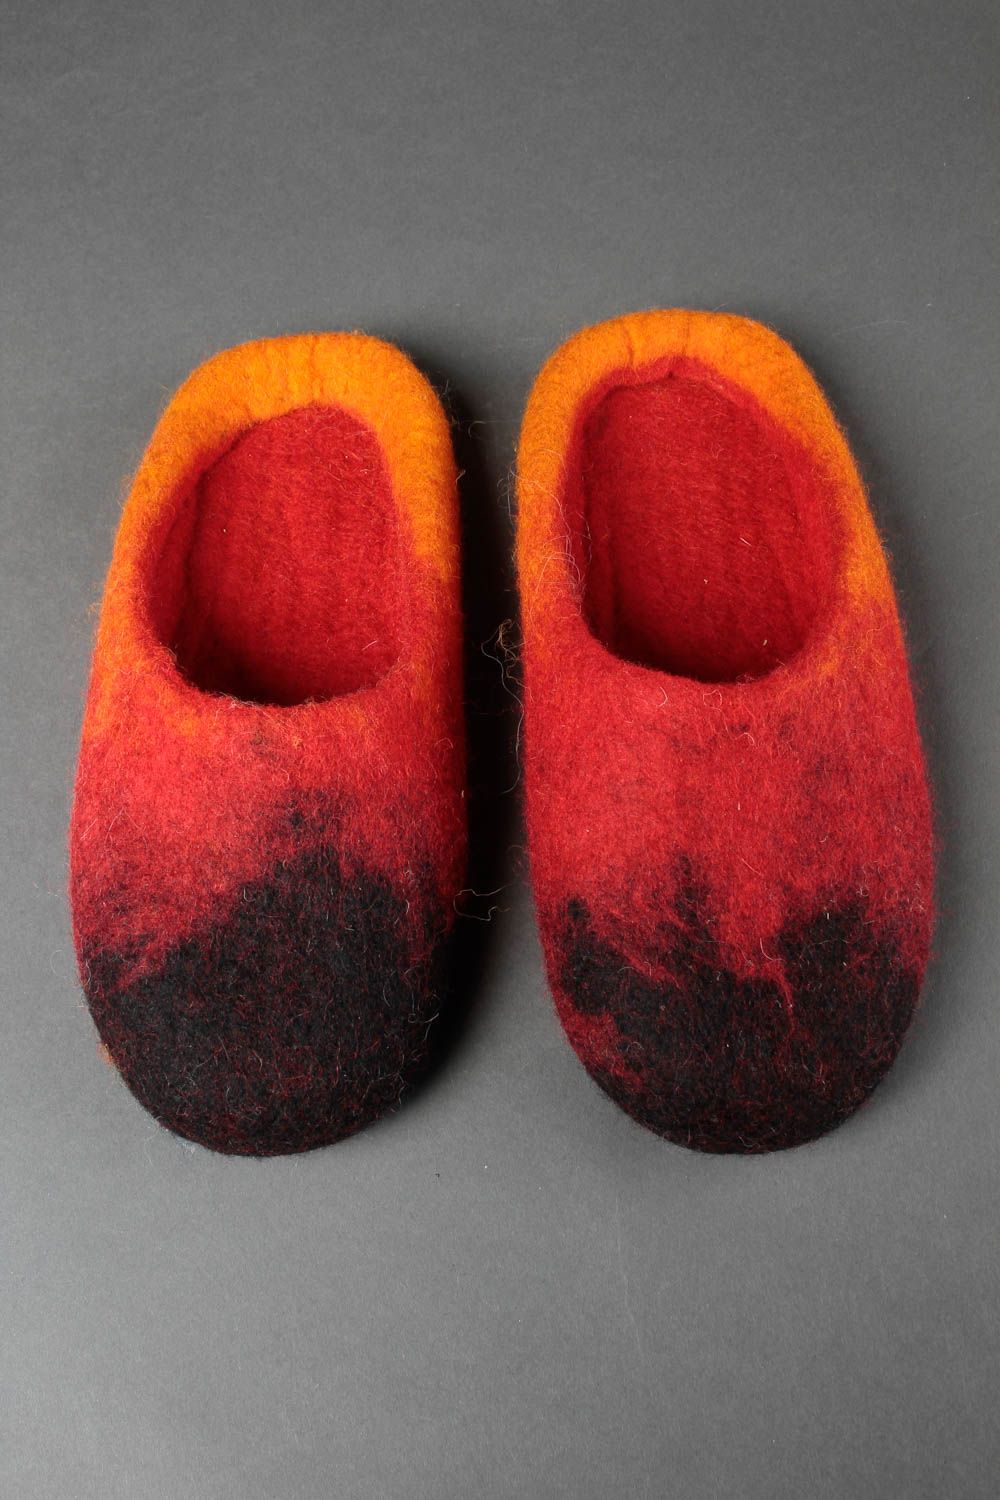 Handmade felted multicilored slippers home woolen slippers warm stylish present photo 2